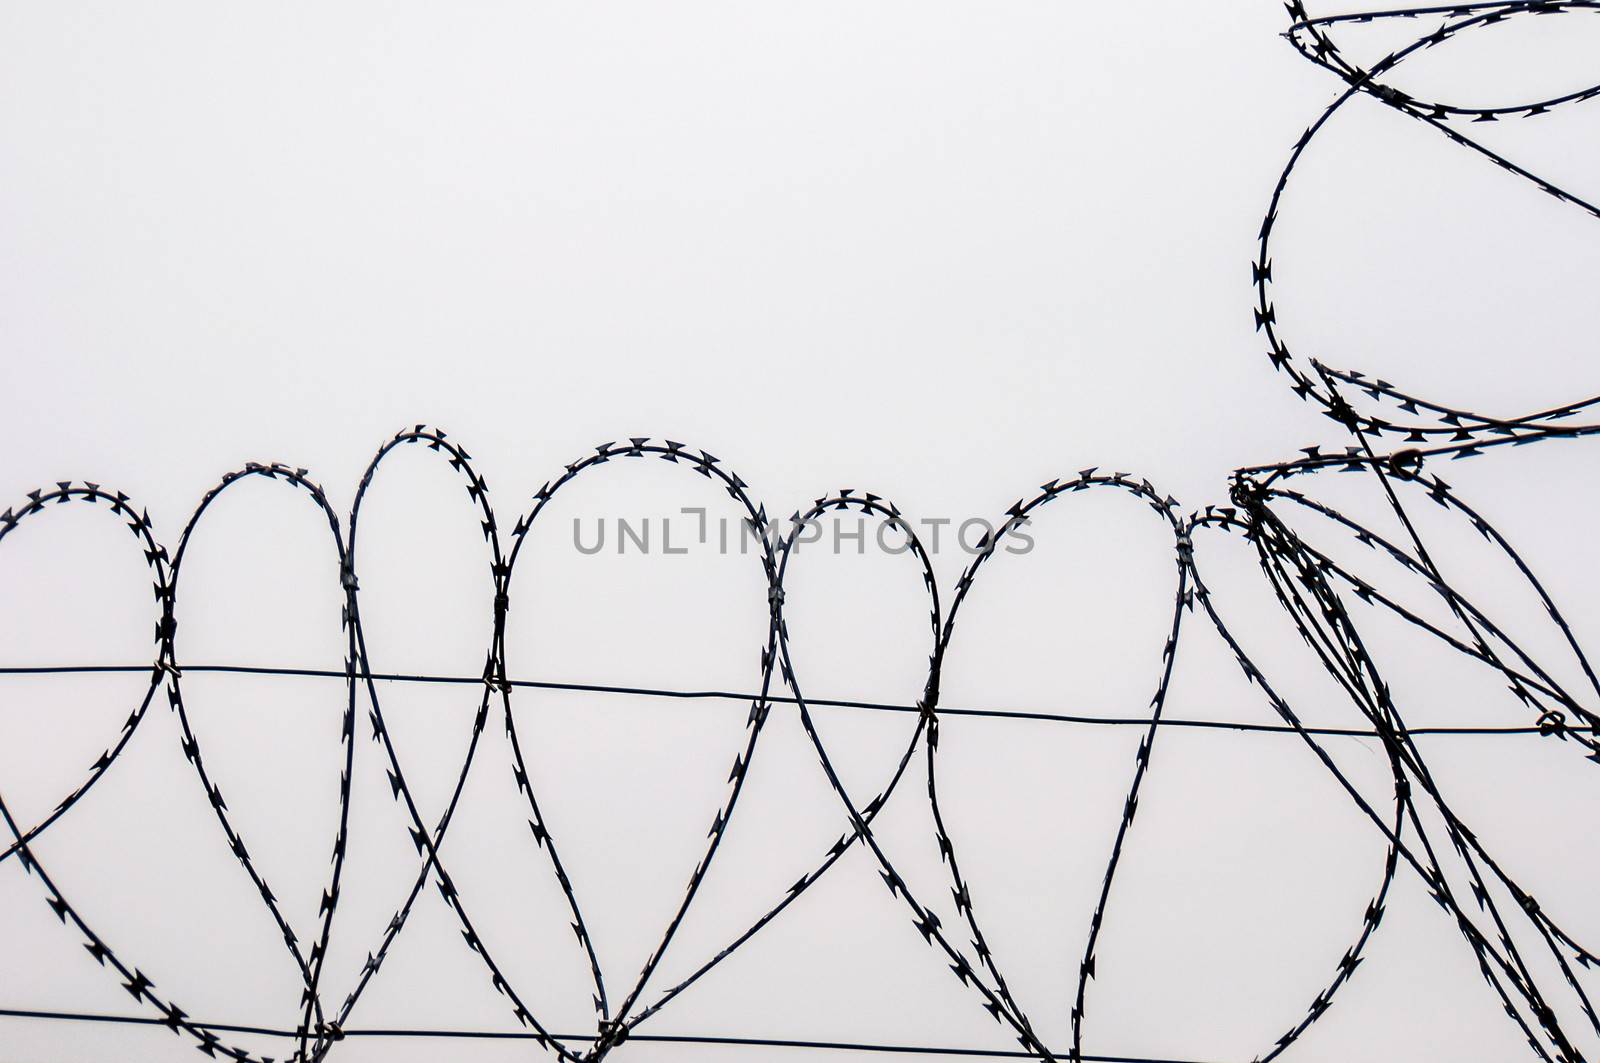 detail of a long barbed wire fence